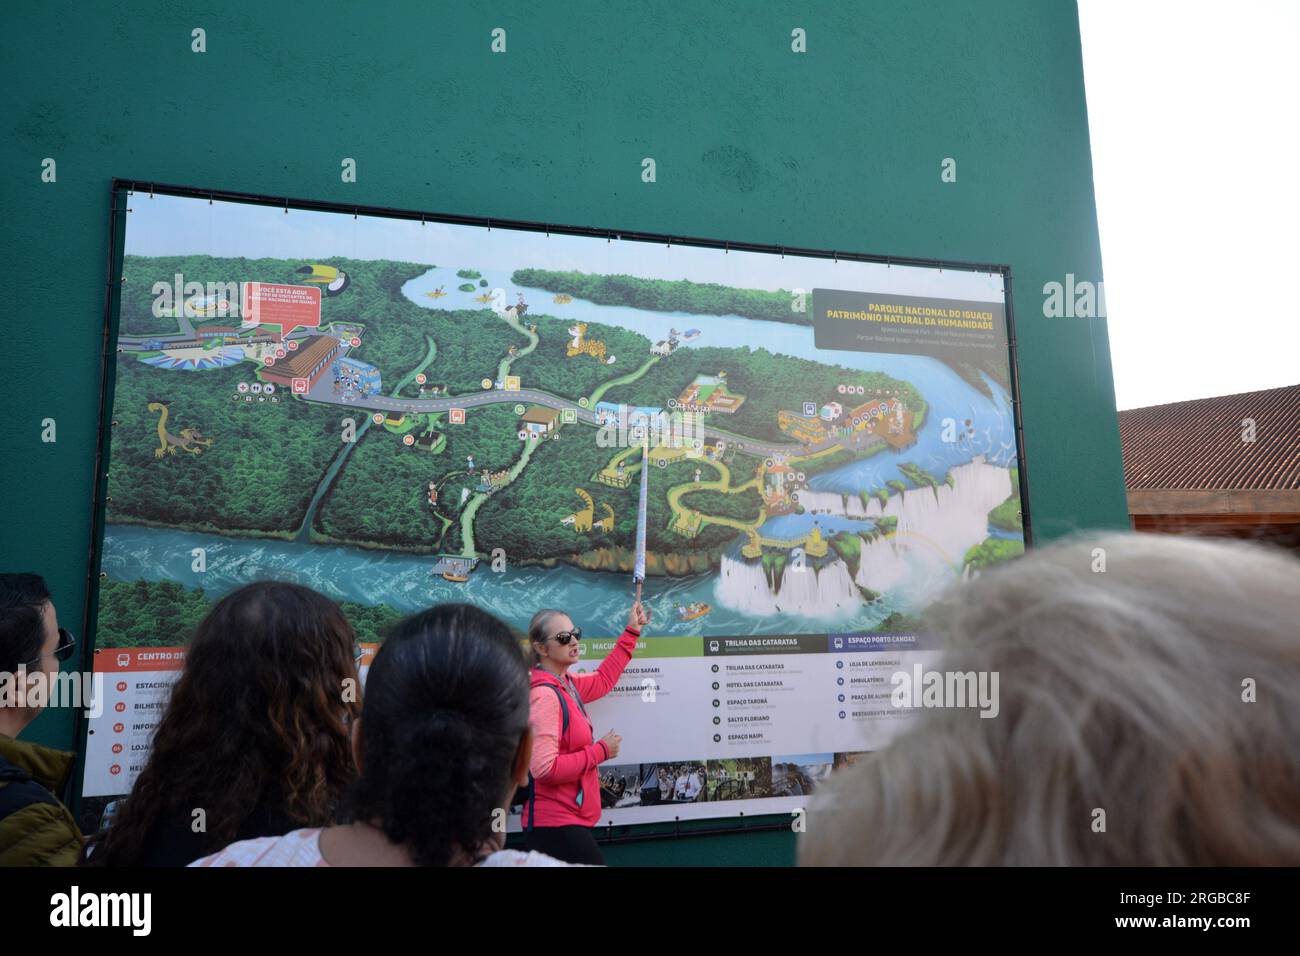 our guide showing the map with details of the Iguazu Falls to tourists on visiting days. Brazil Stock Photo